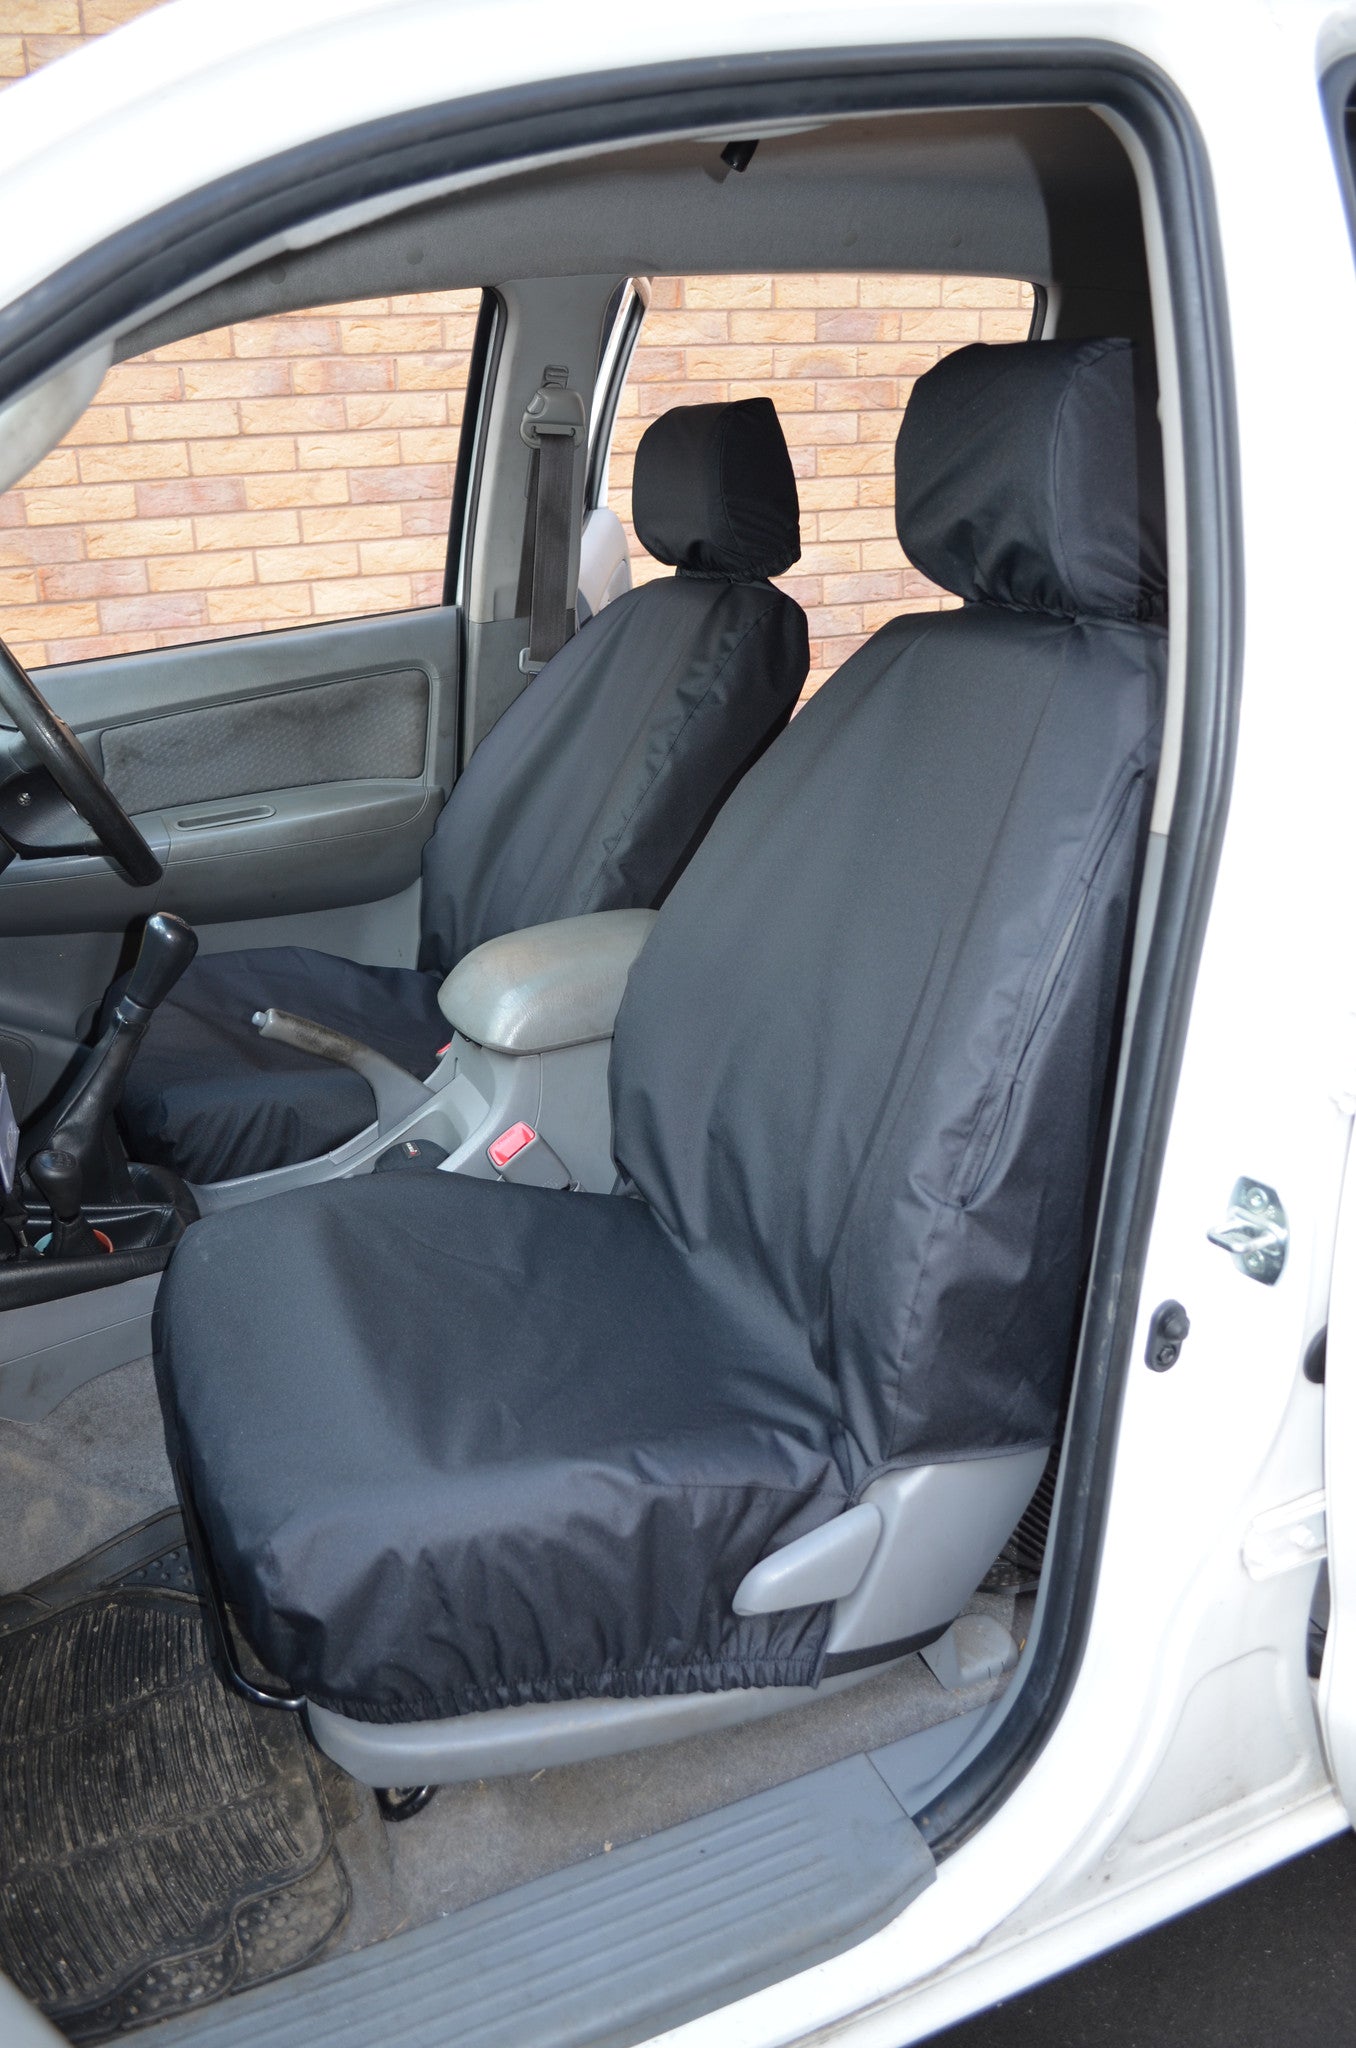 Toyota Hilux 2005 - 2016 Seat Covers Front Pair / Black Turtle Covers Ltd